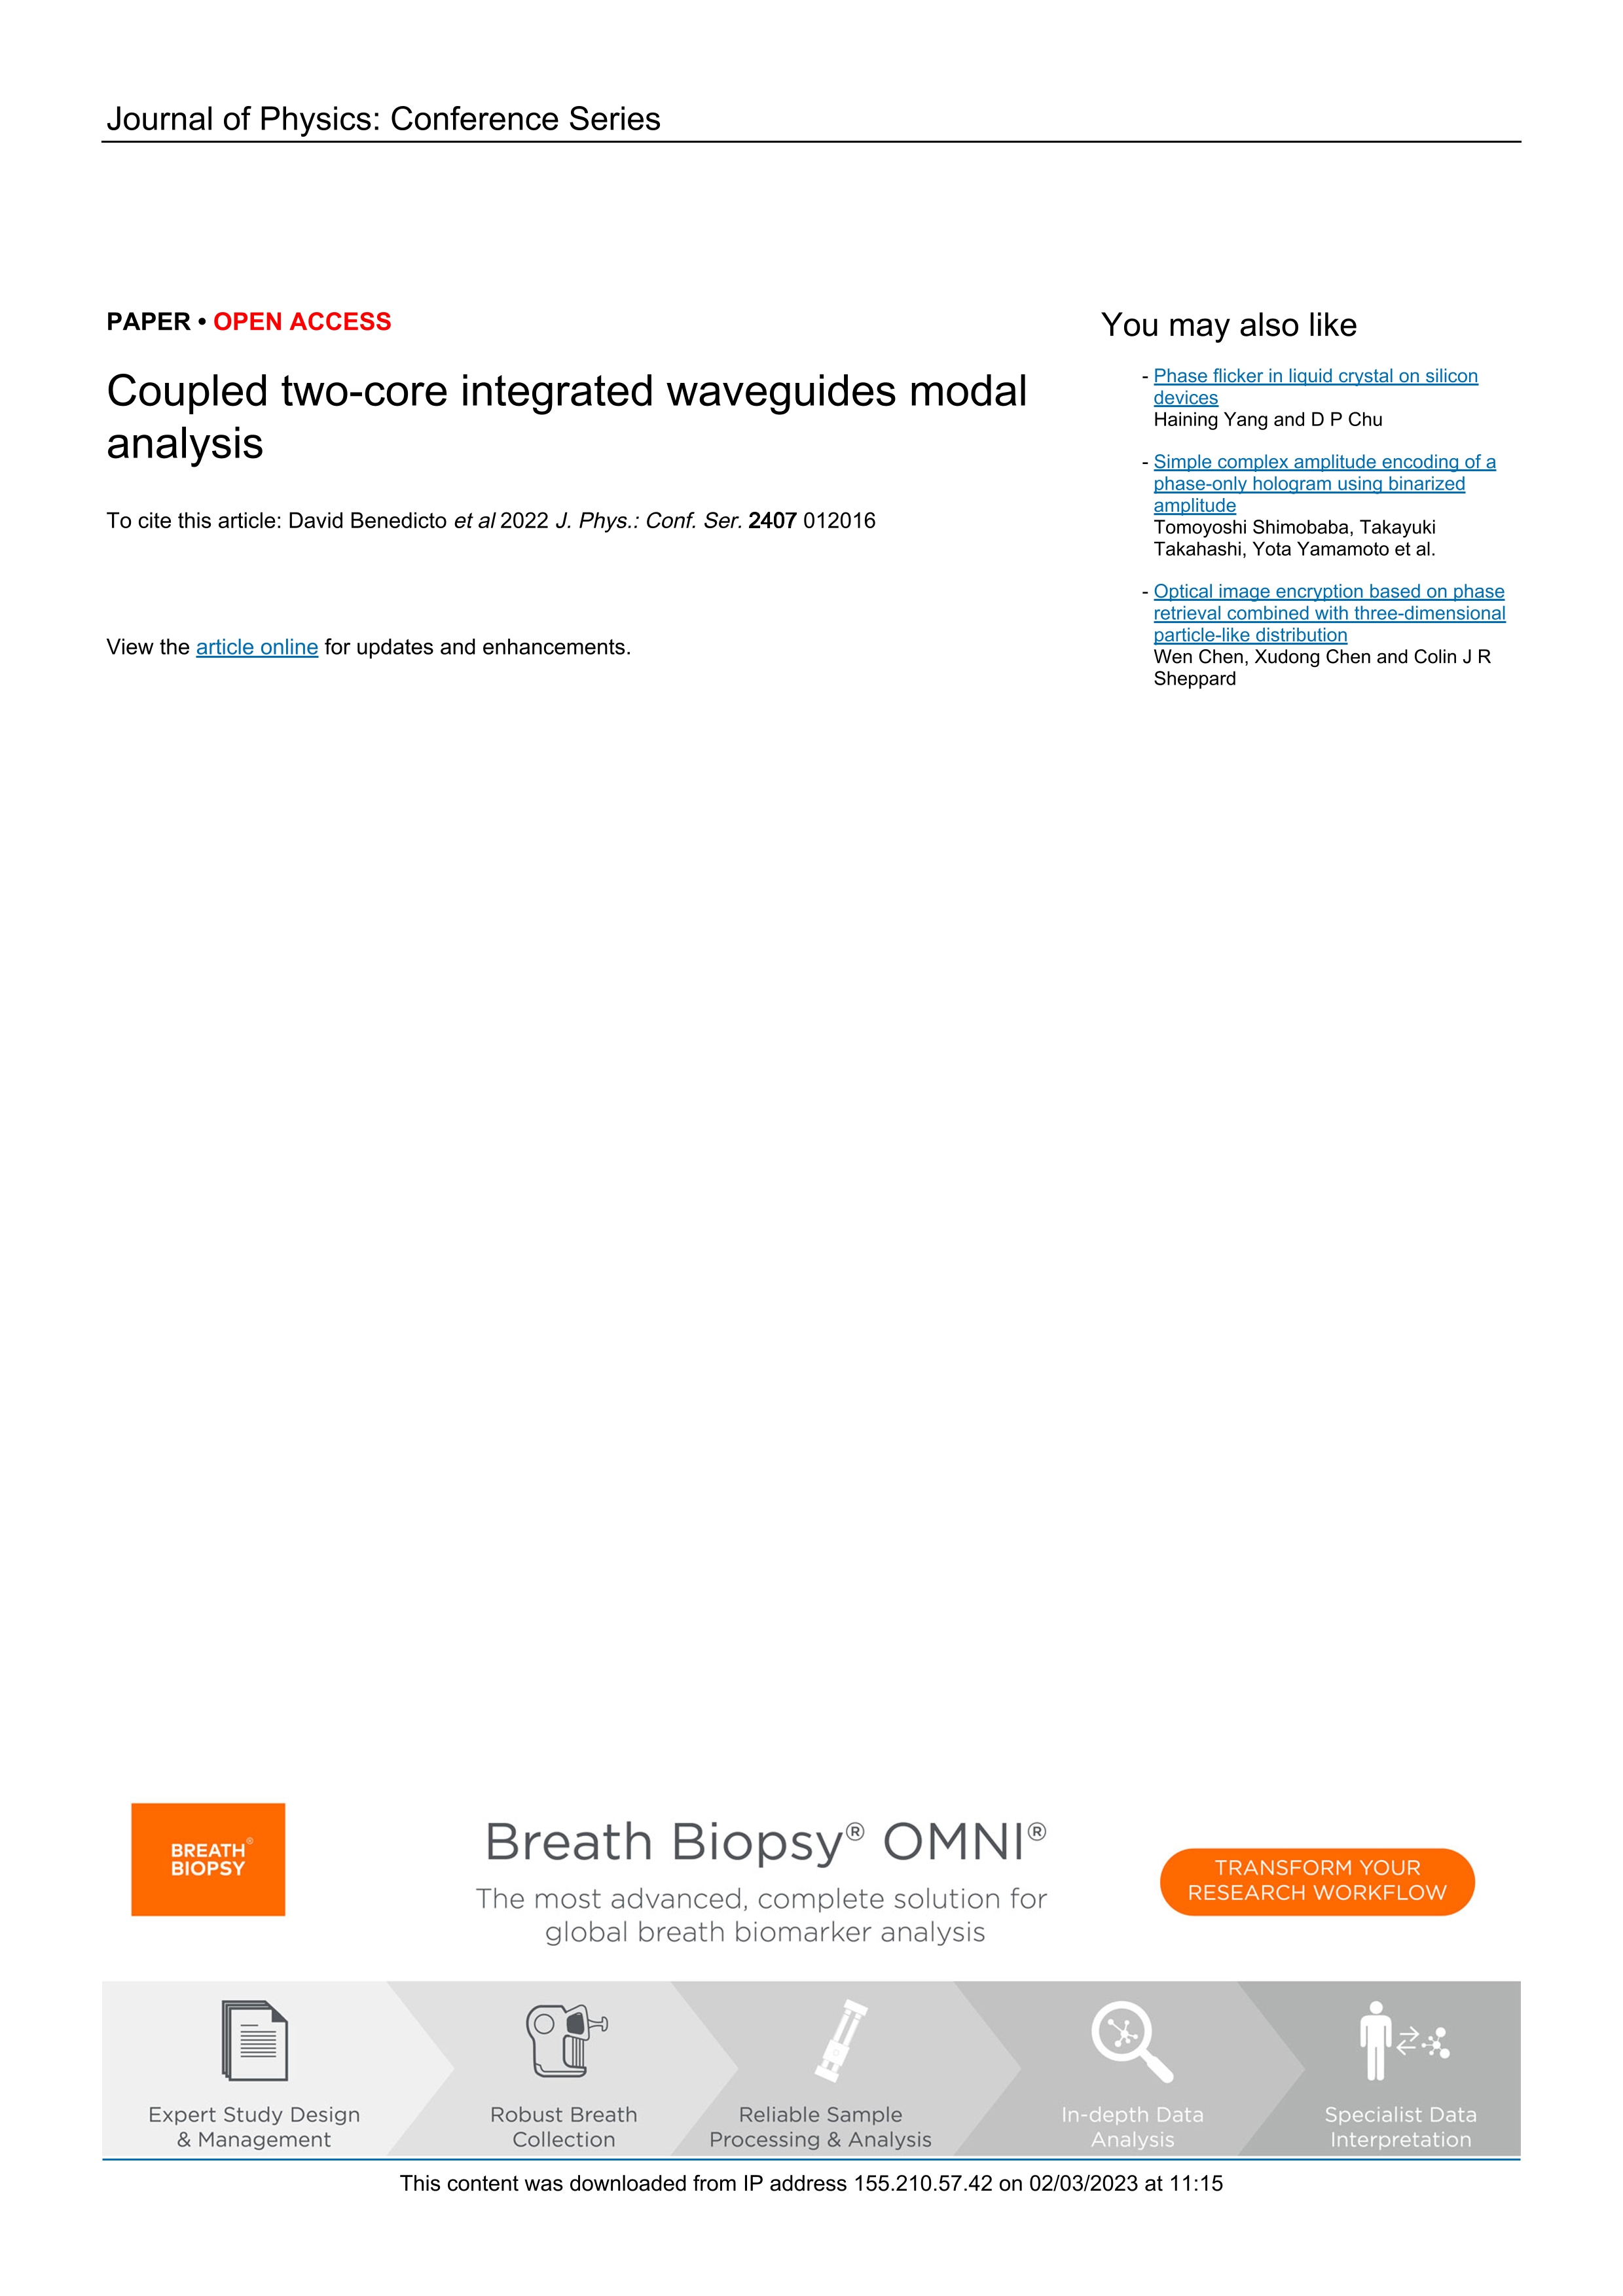 Coupled two-core integrated waveguides modal analysis